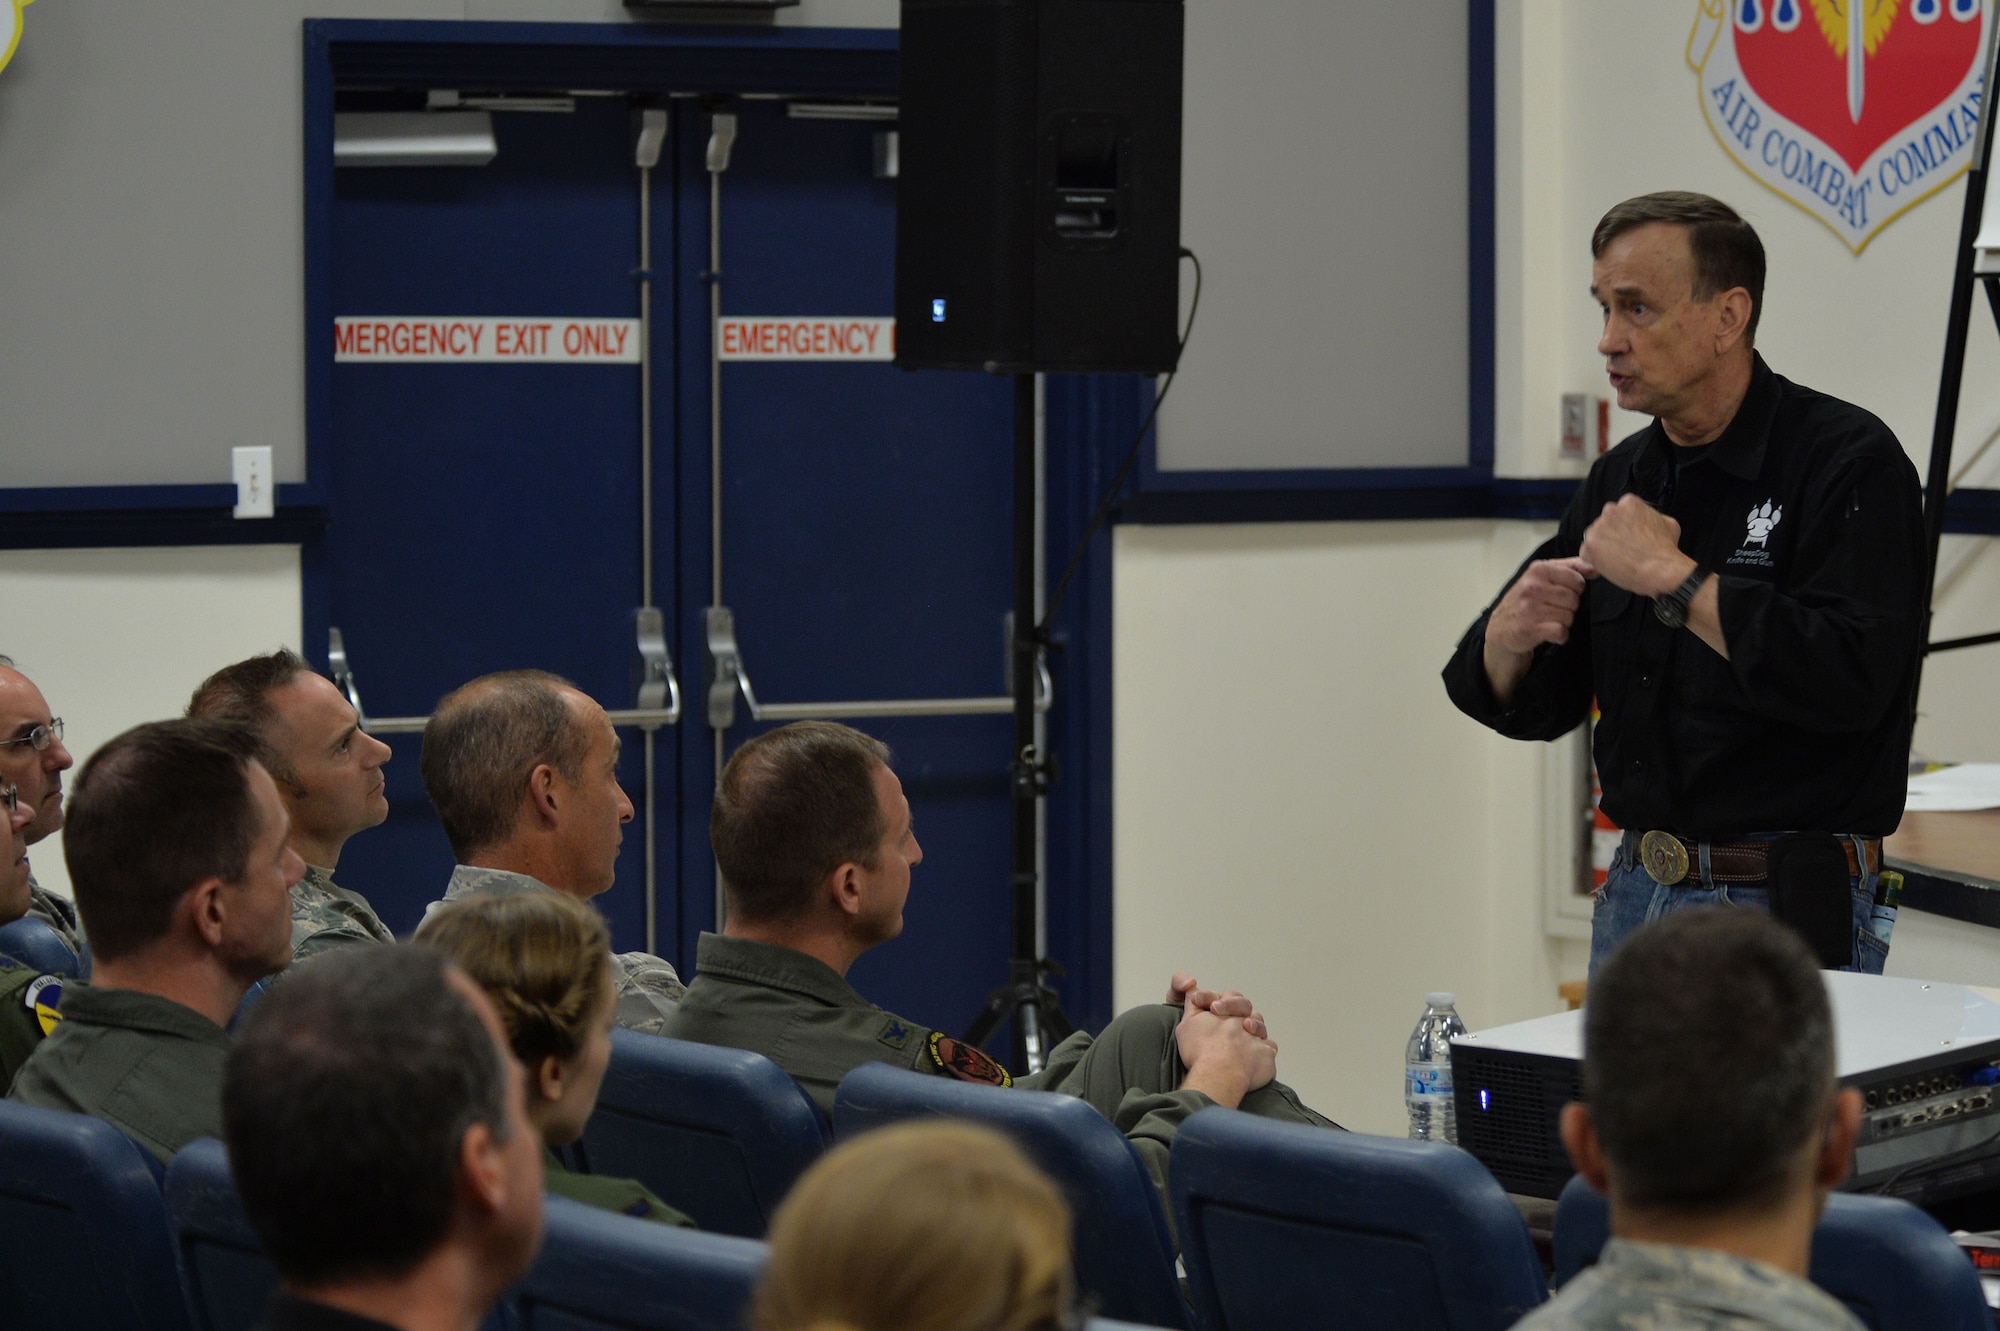 Retired Lt. Col. Dave Grossman elaborates on the effects that post-traumatic stress disorder can have on military members and their families Nov. 13, 2017, at Creech Air Force Base, Nev. Grossman is a public speaker and former professor who shares his psychological research with service members, law enforcement professionals and university students across the U.S. (U.S. Air Force Photo by Airman 1st Class Haley Stevens)